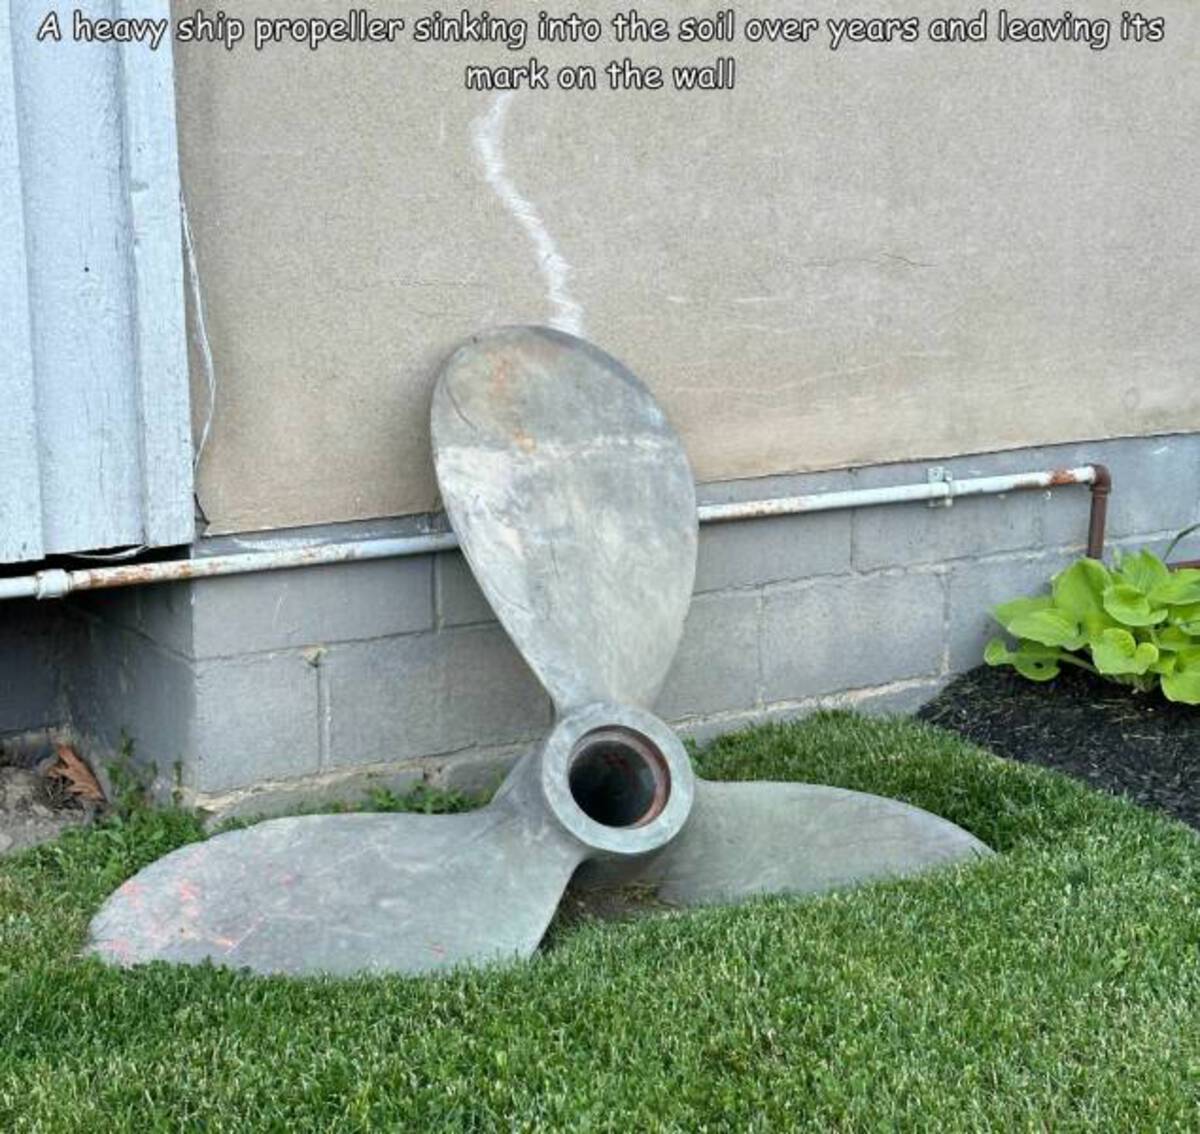 grass - A heavy ship propeller sinking into the soil over years and leaving its mark on the wall